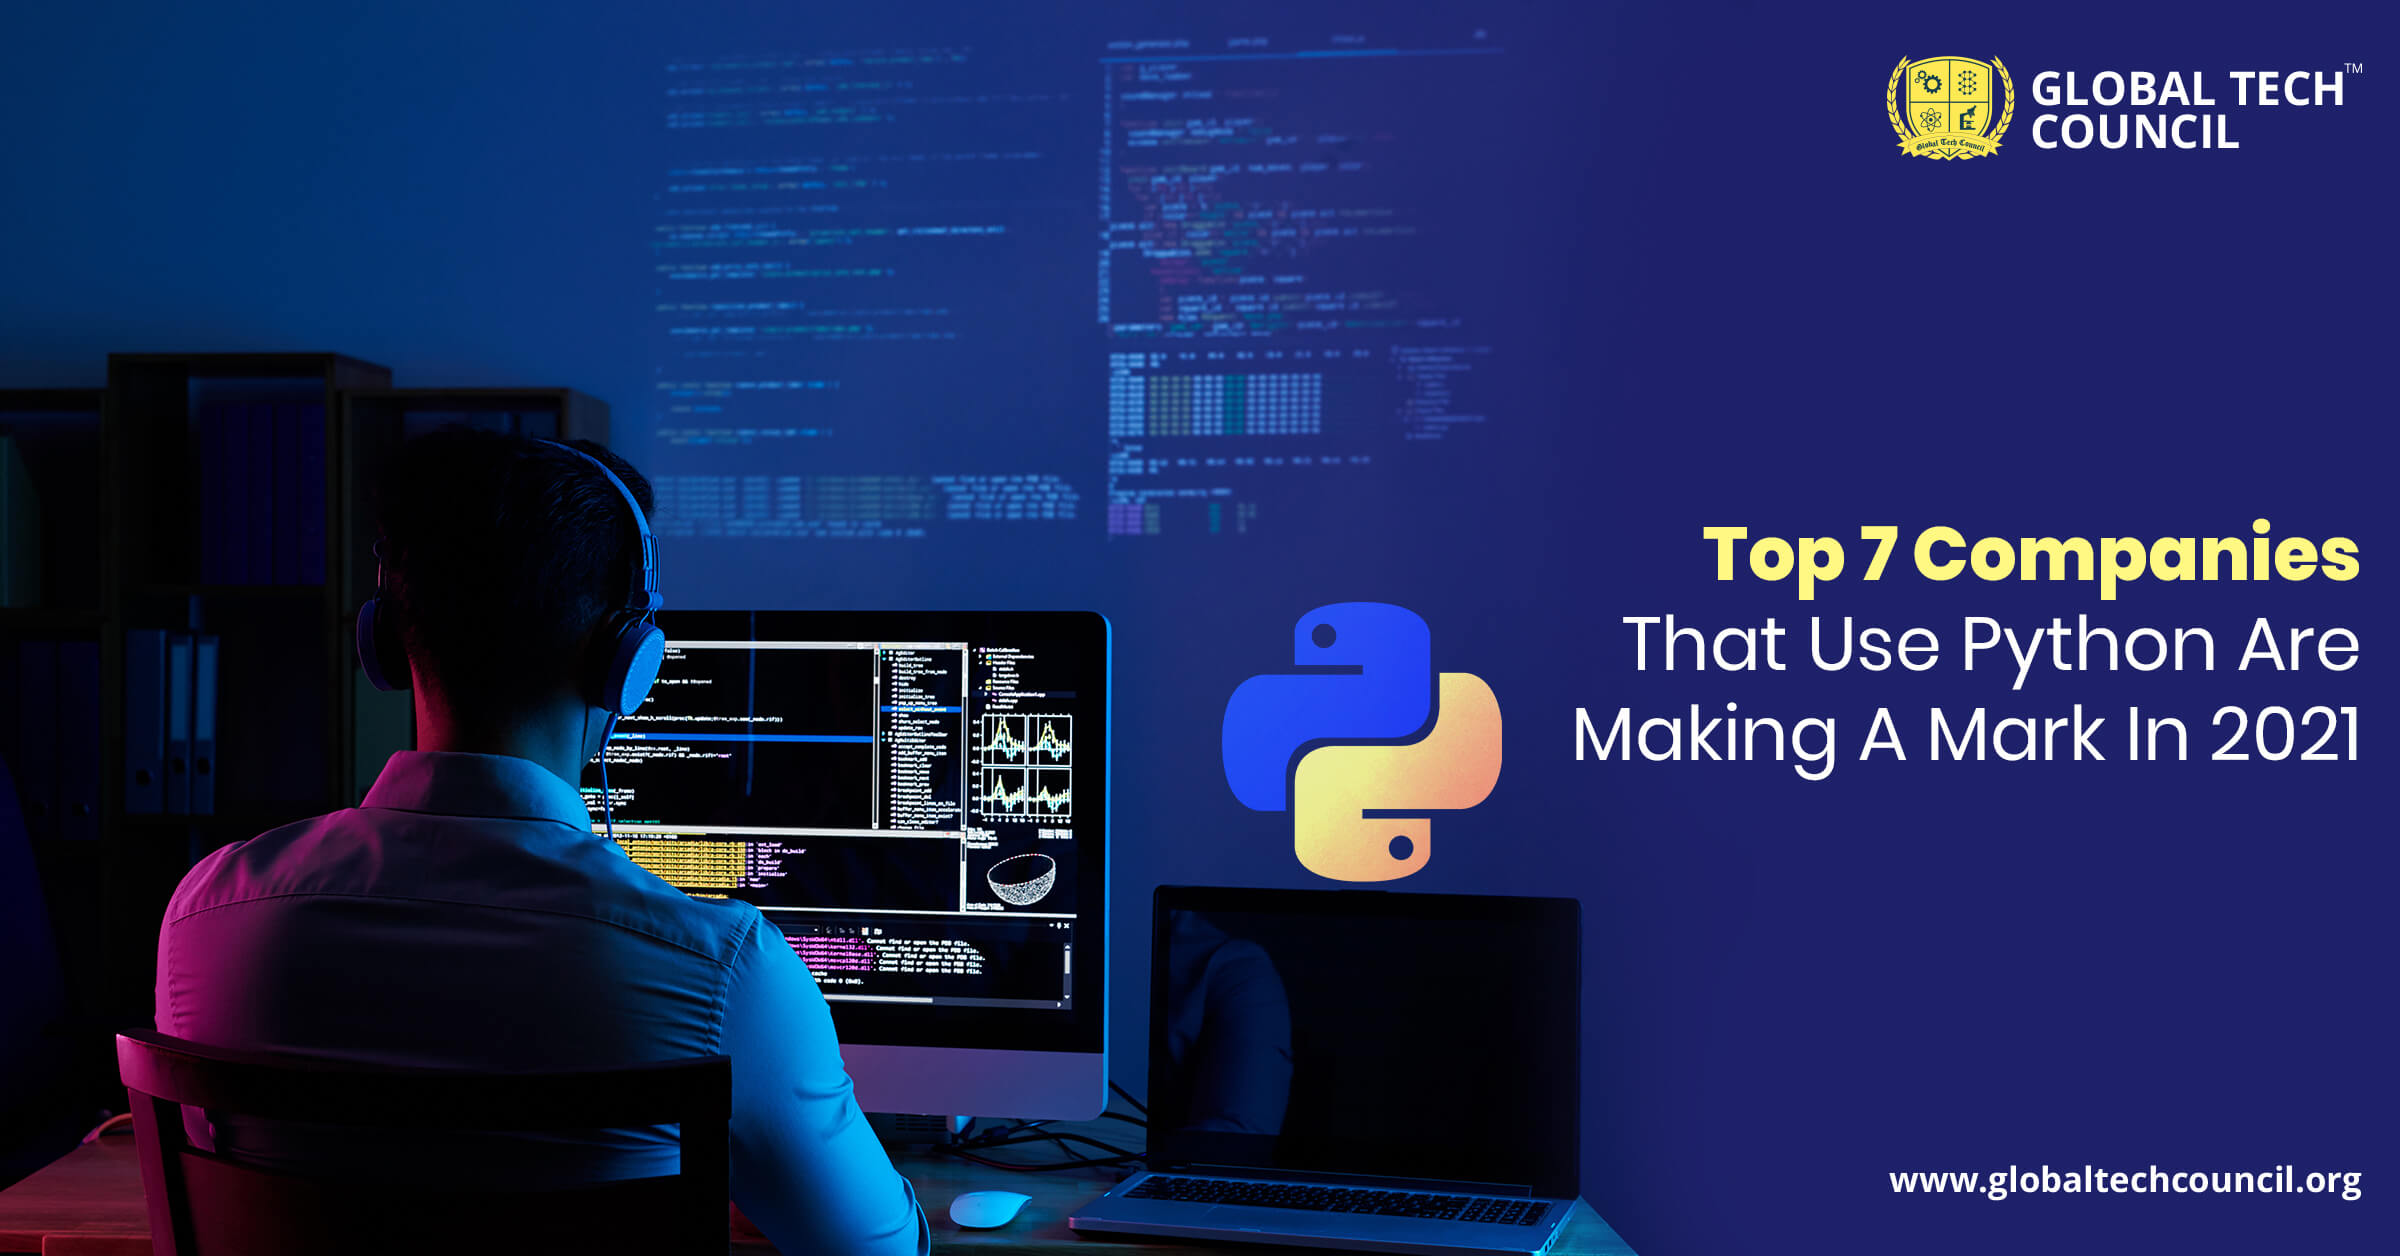 Top 7 Companies That Use Python Are Making A Mark In 2021